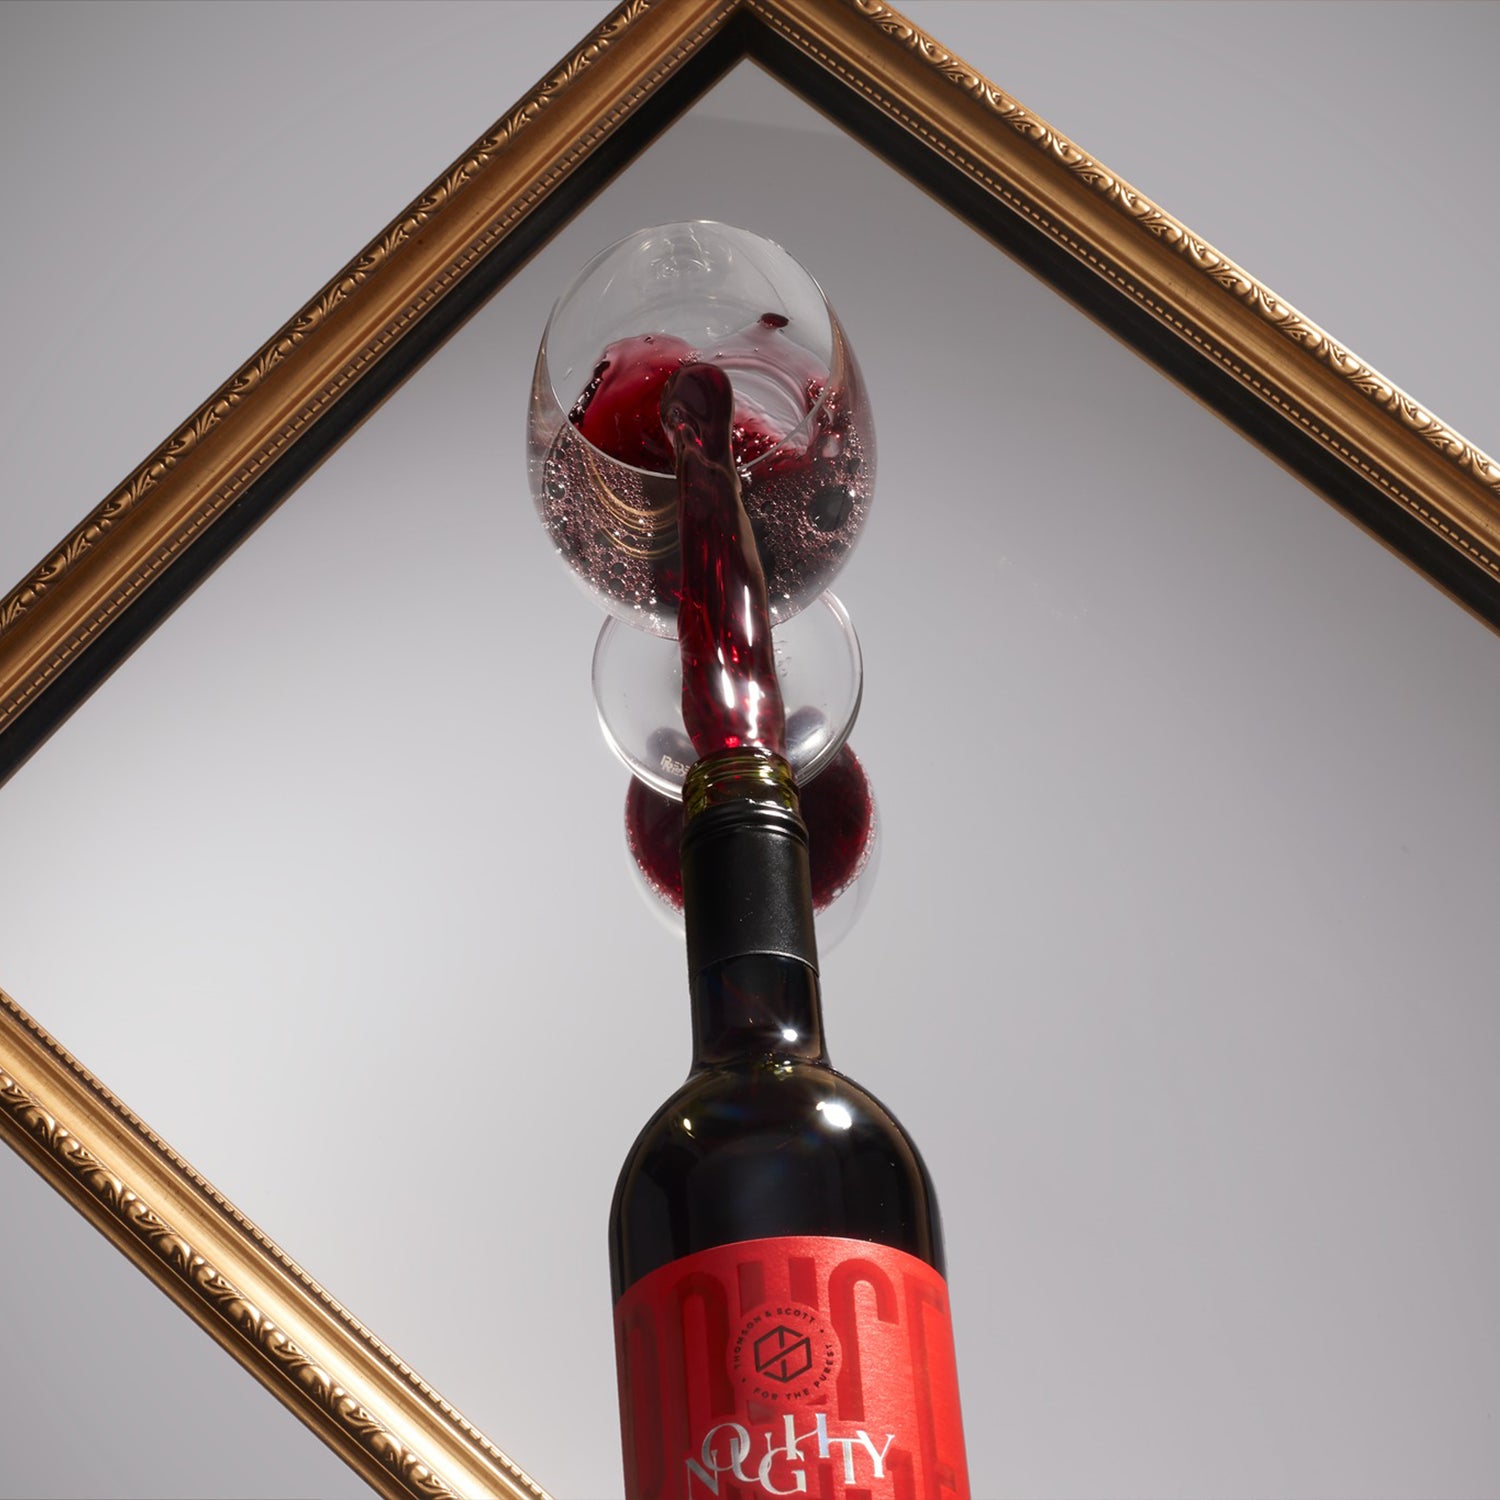 Noughty non-alcoholic red wine